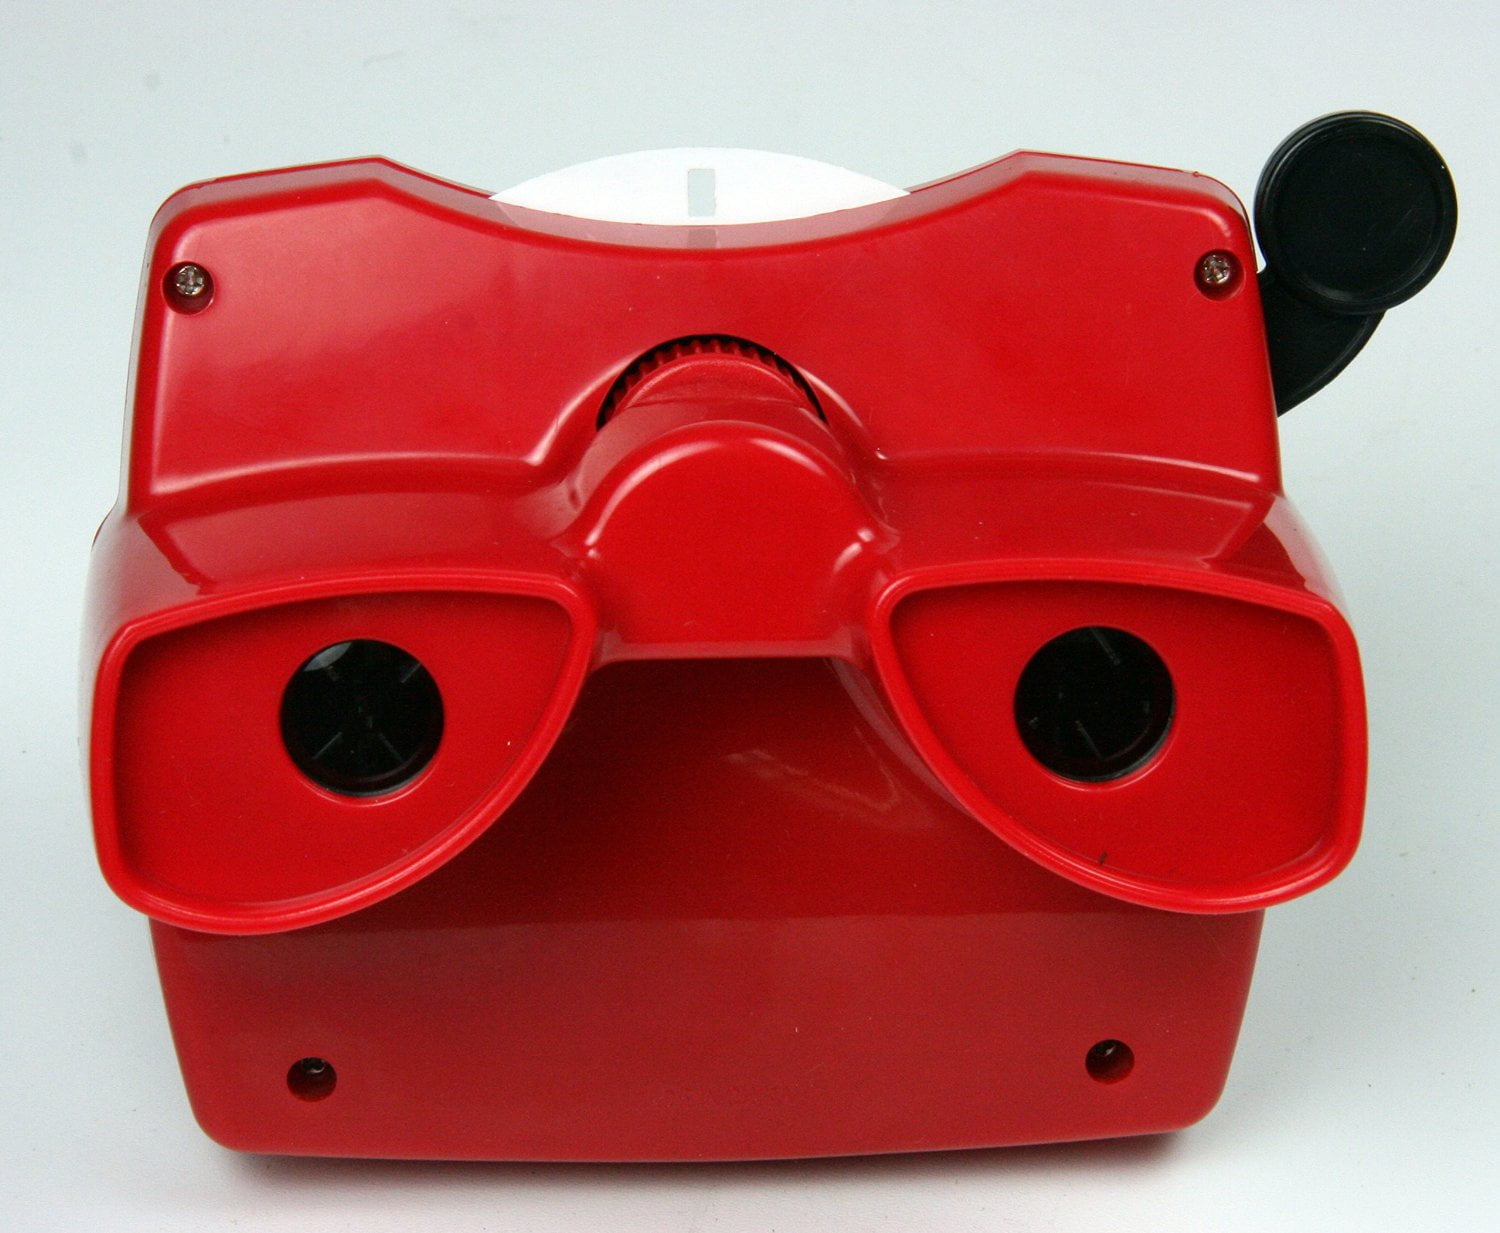 3dstereo-viewmaster-3d-reel-viewfinder-focusing-viewer-for-viewmaster